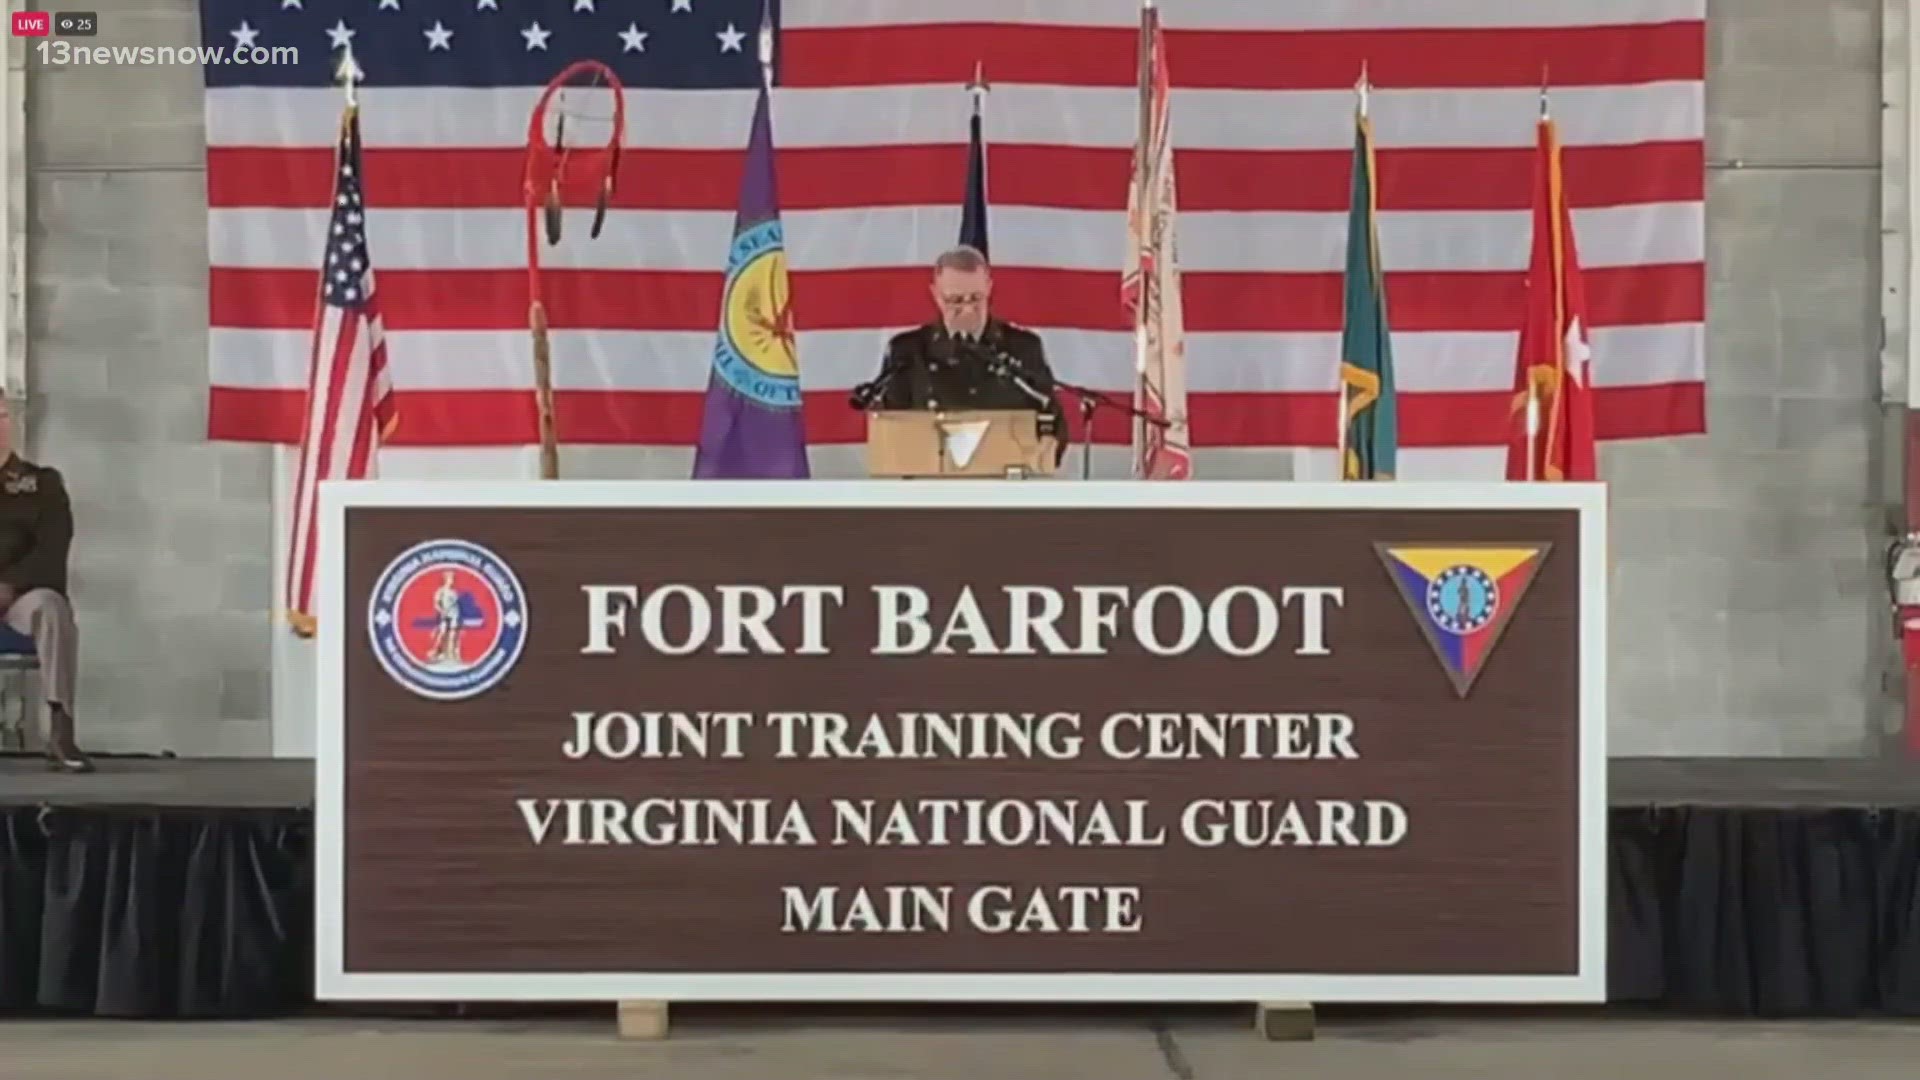 Today, the army re-designated it to "Fort Barfoot", in honor of Colonel Van T. Barfoot. He has a lot of Virginia ties.